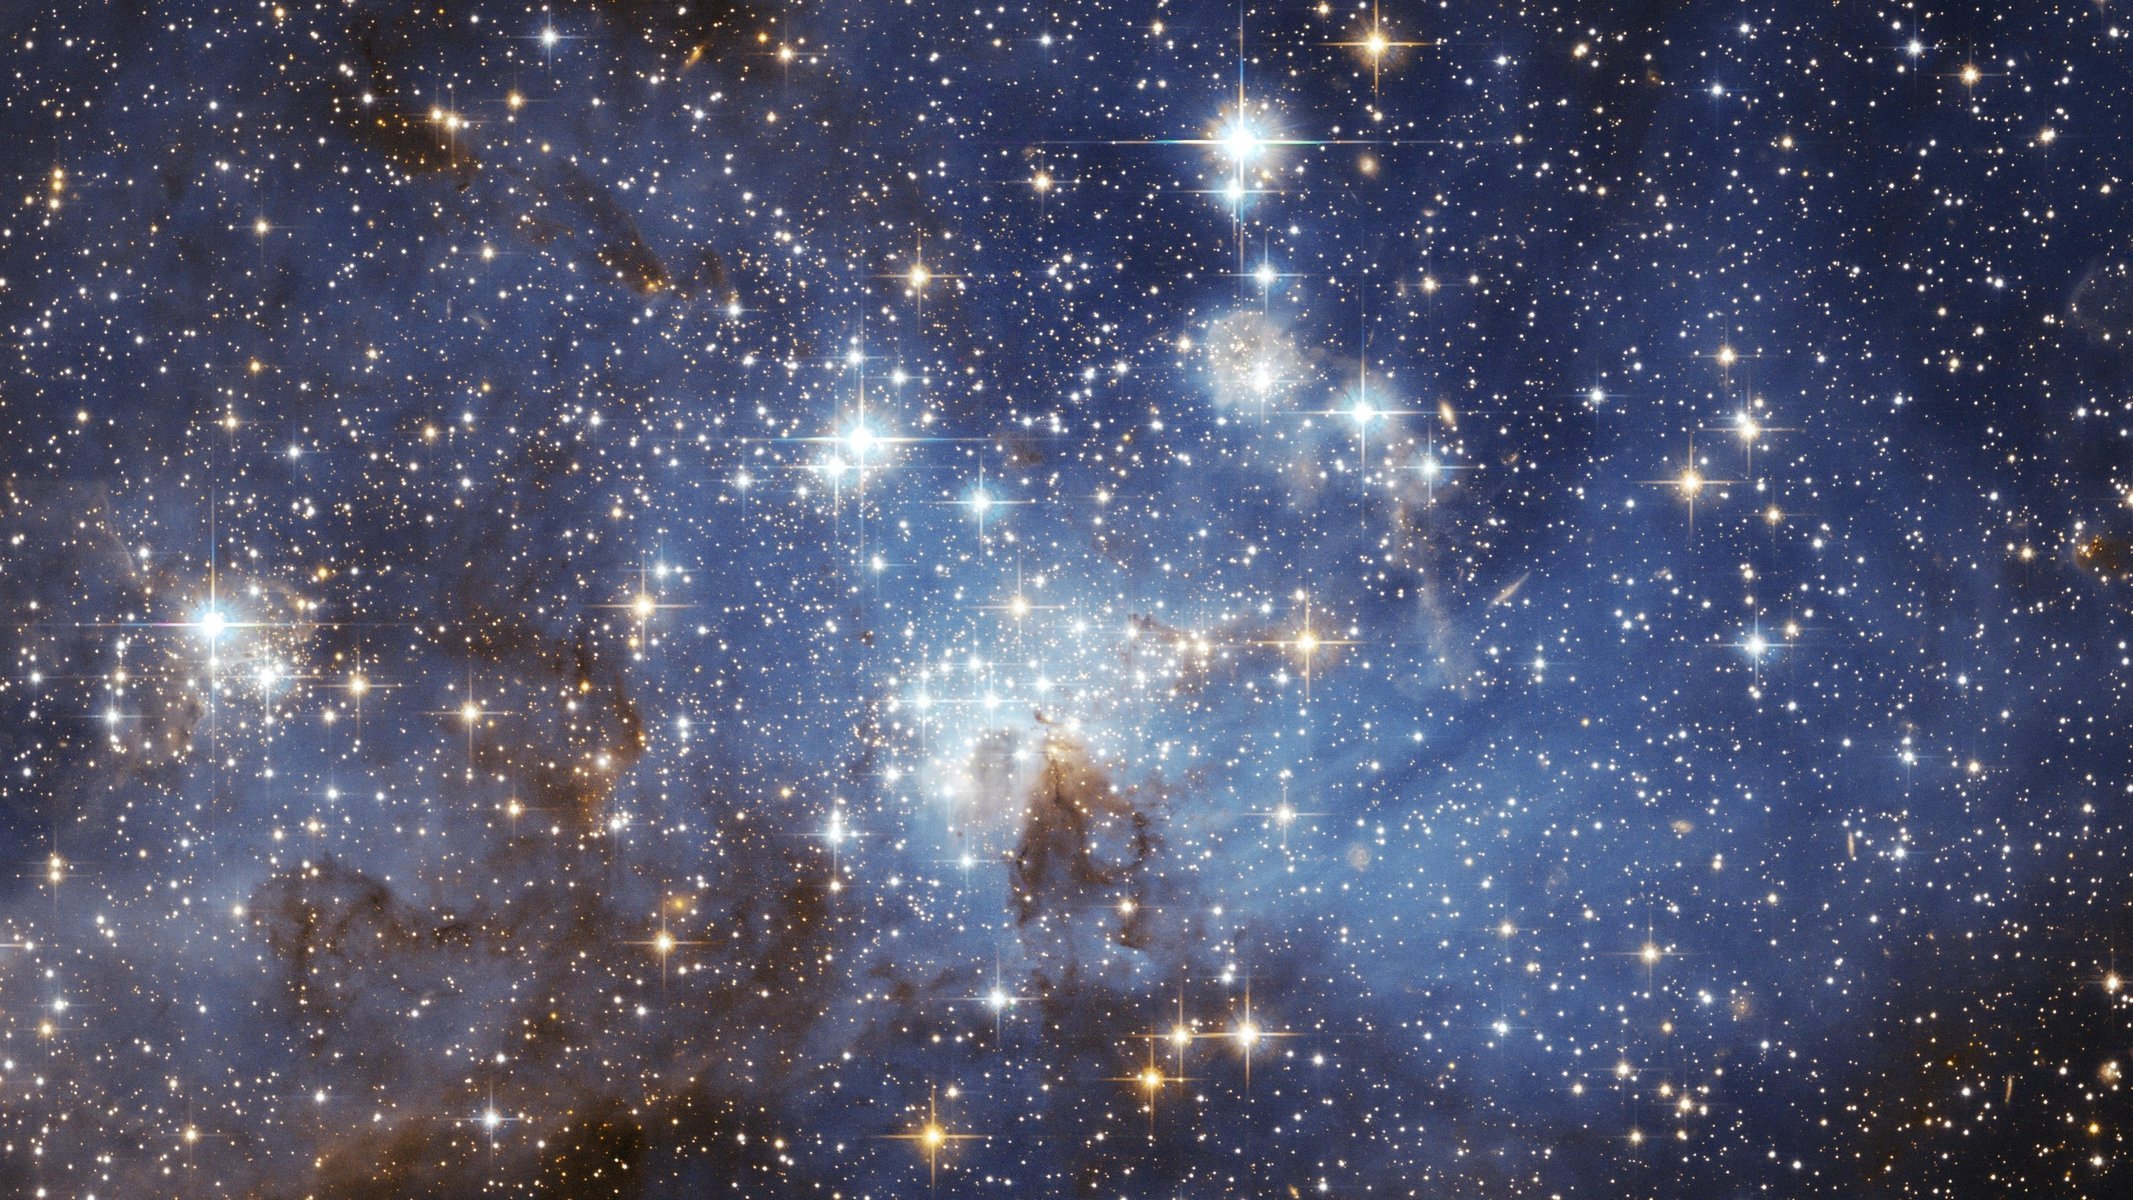 The beauty of the stars shining in space